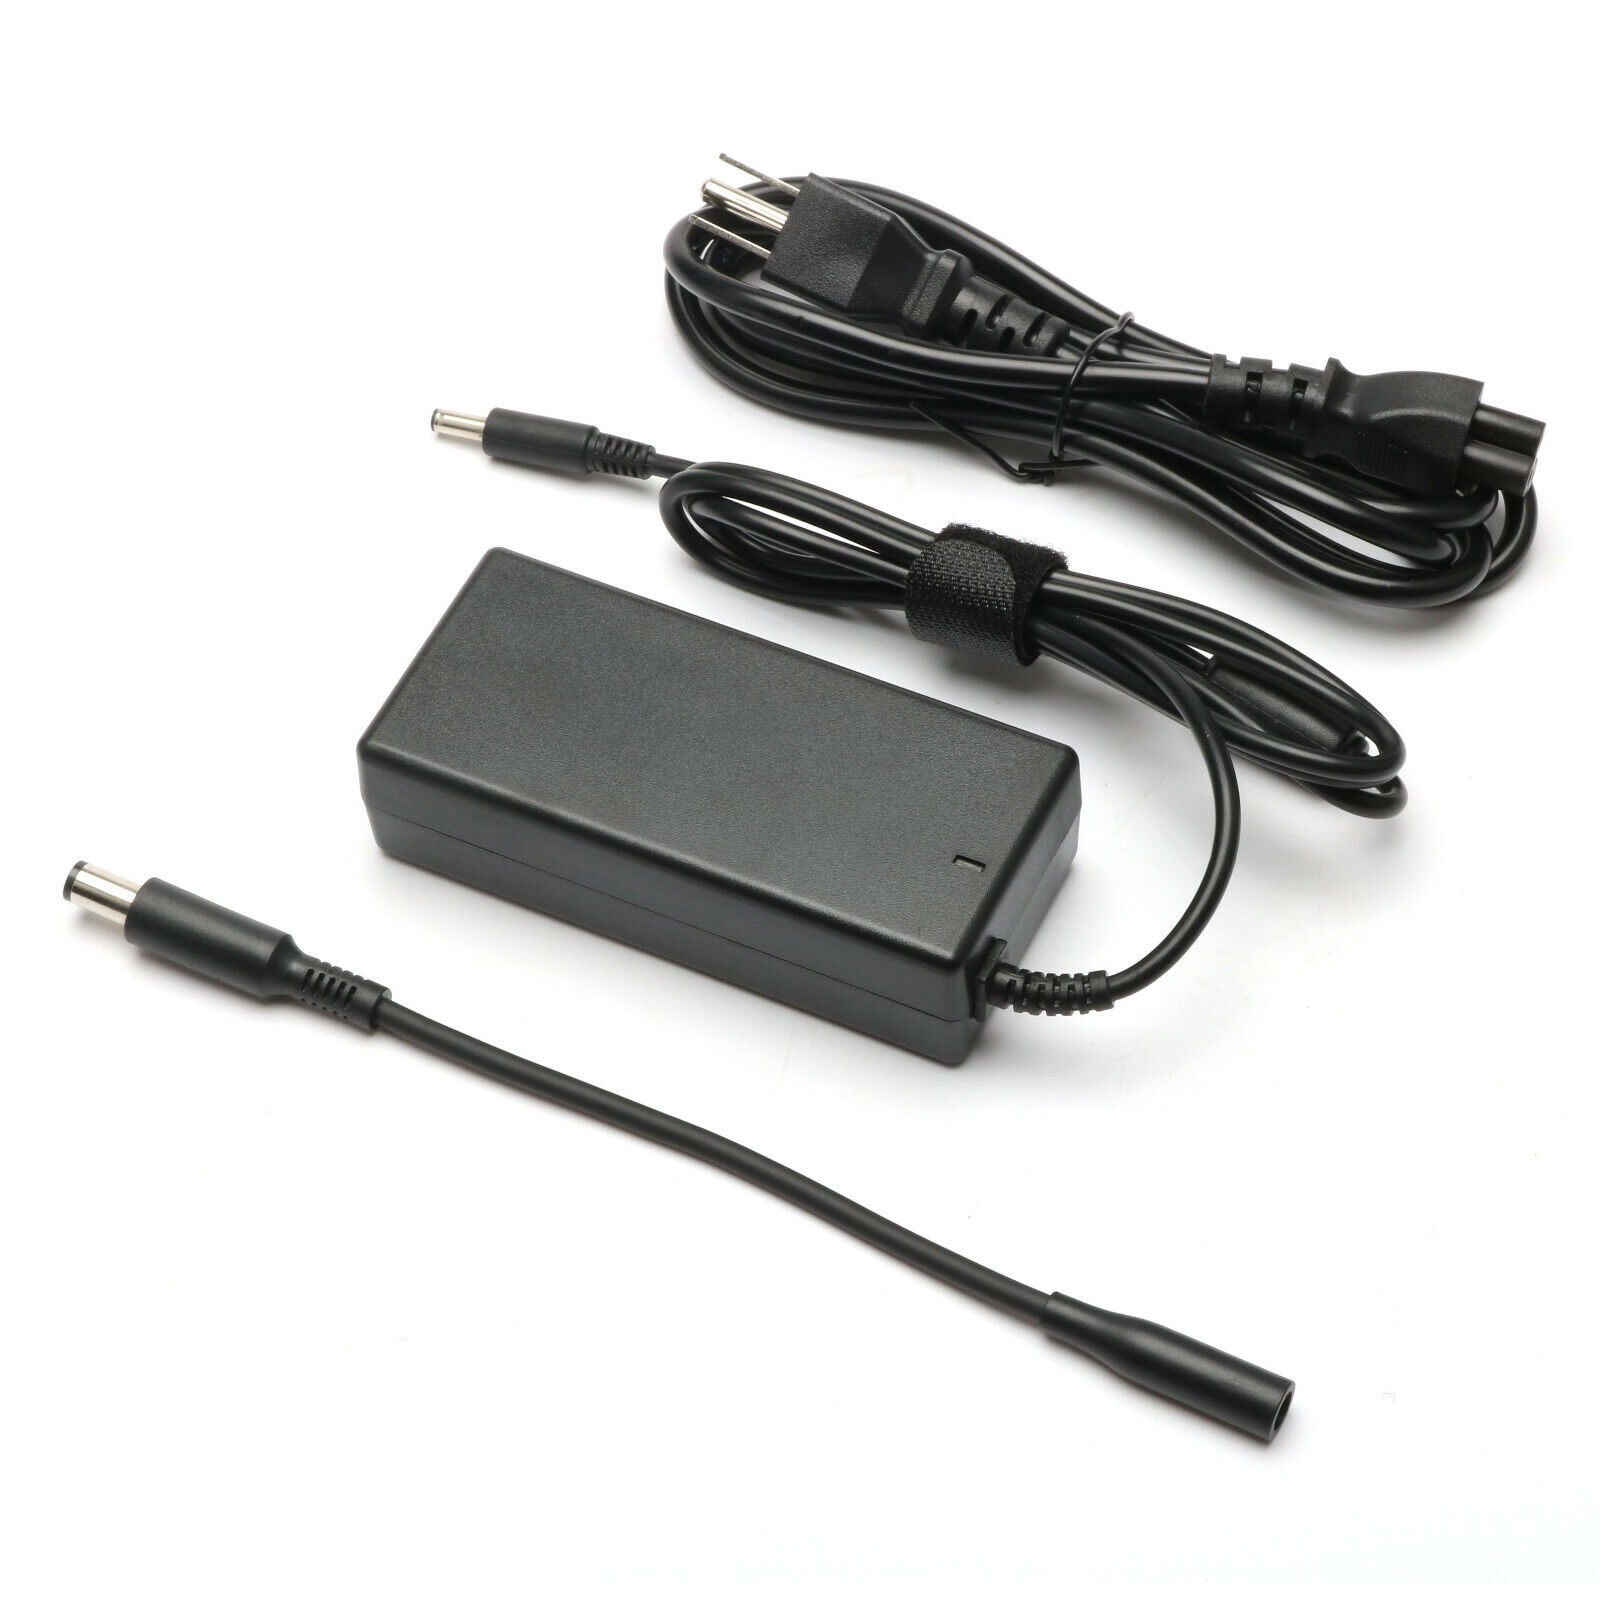 65W AC Charger for Dell Inspiron 17 7706 3280 7700 2 in 1 Laptop Power Adapter